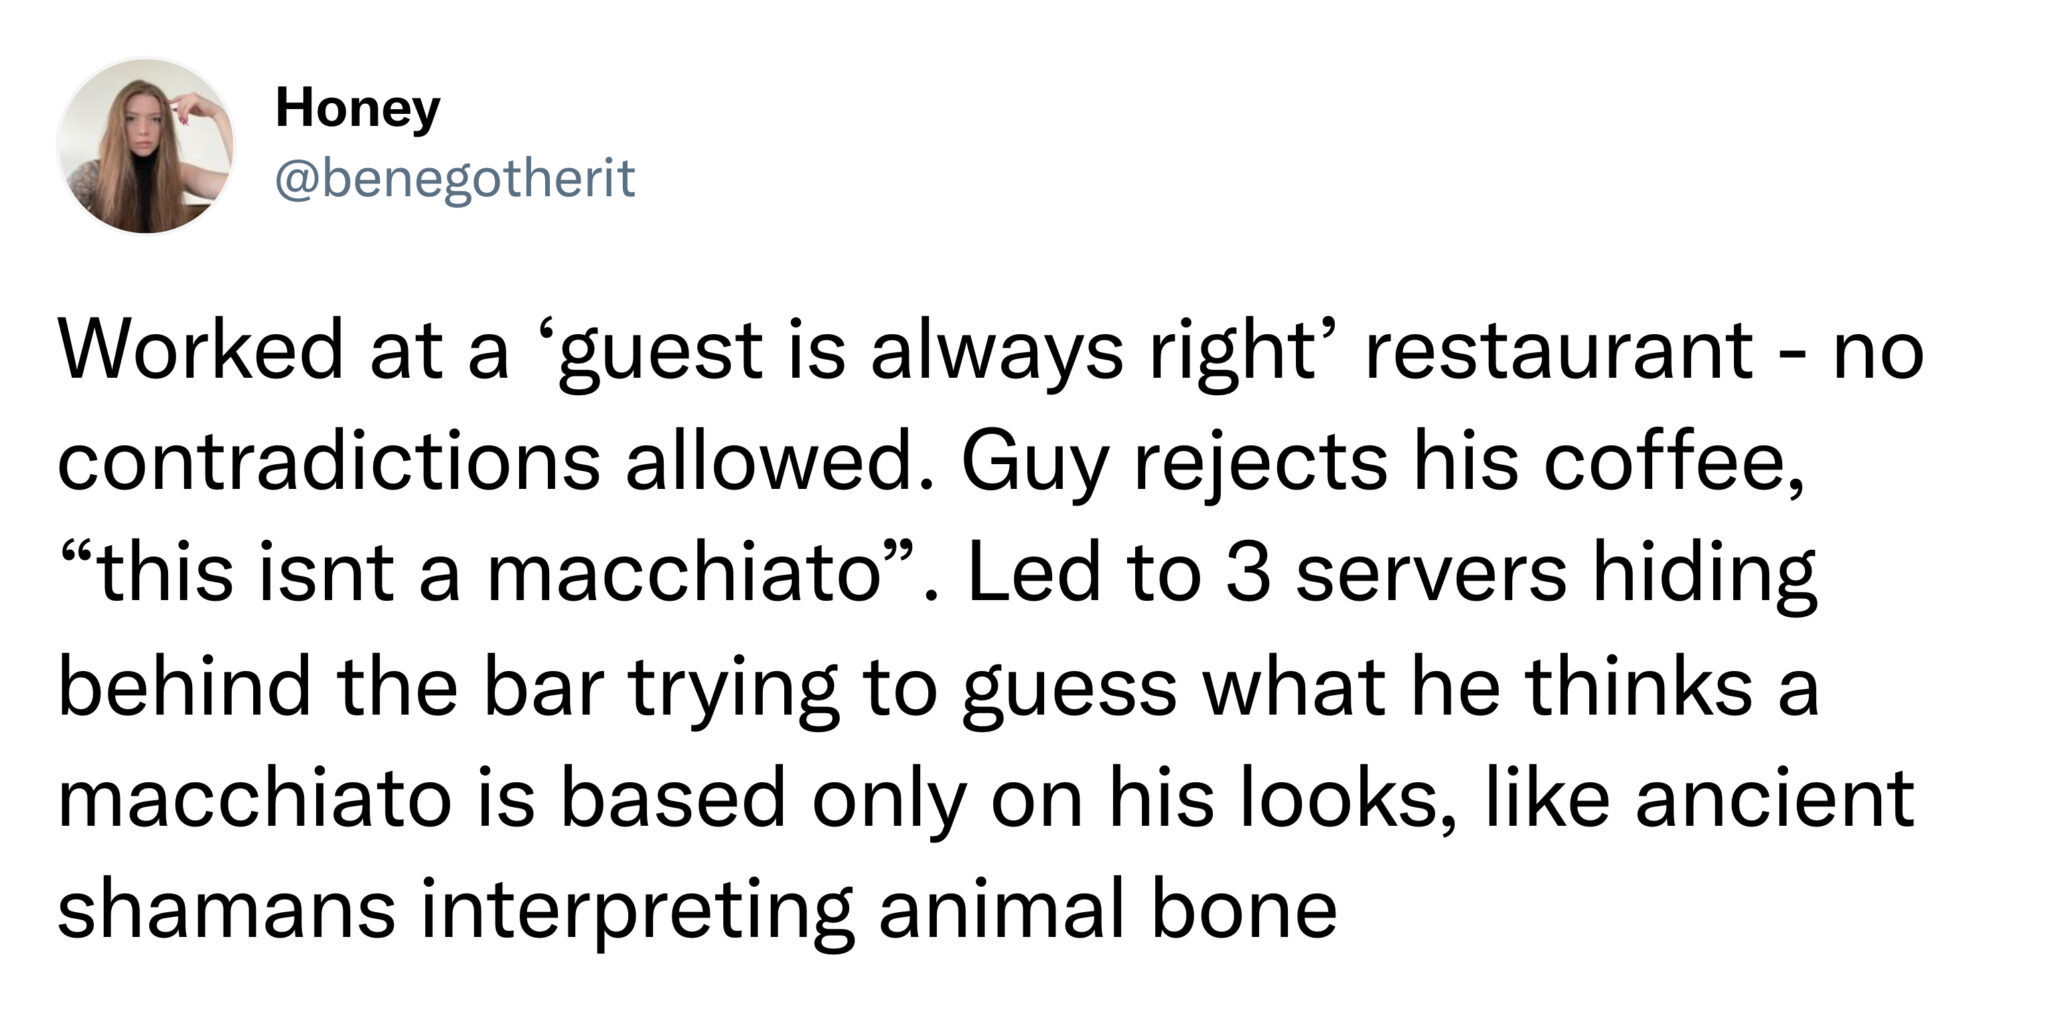 funny tweets  -  photography review - Honey Worked at a 'guest is always right' restaurant no contradictions allowed. Guy rejects his coffee, "this isnt a macchiato". Led to 3 servers hiding behind the bar trying to guess what he thinks a macchiato is bas